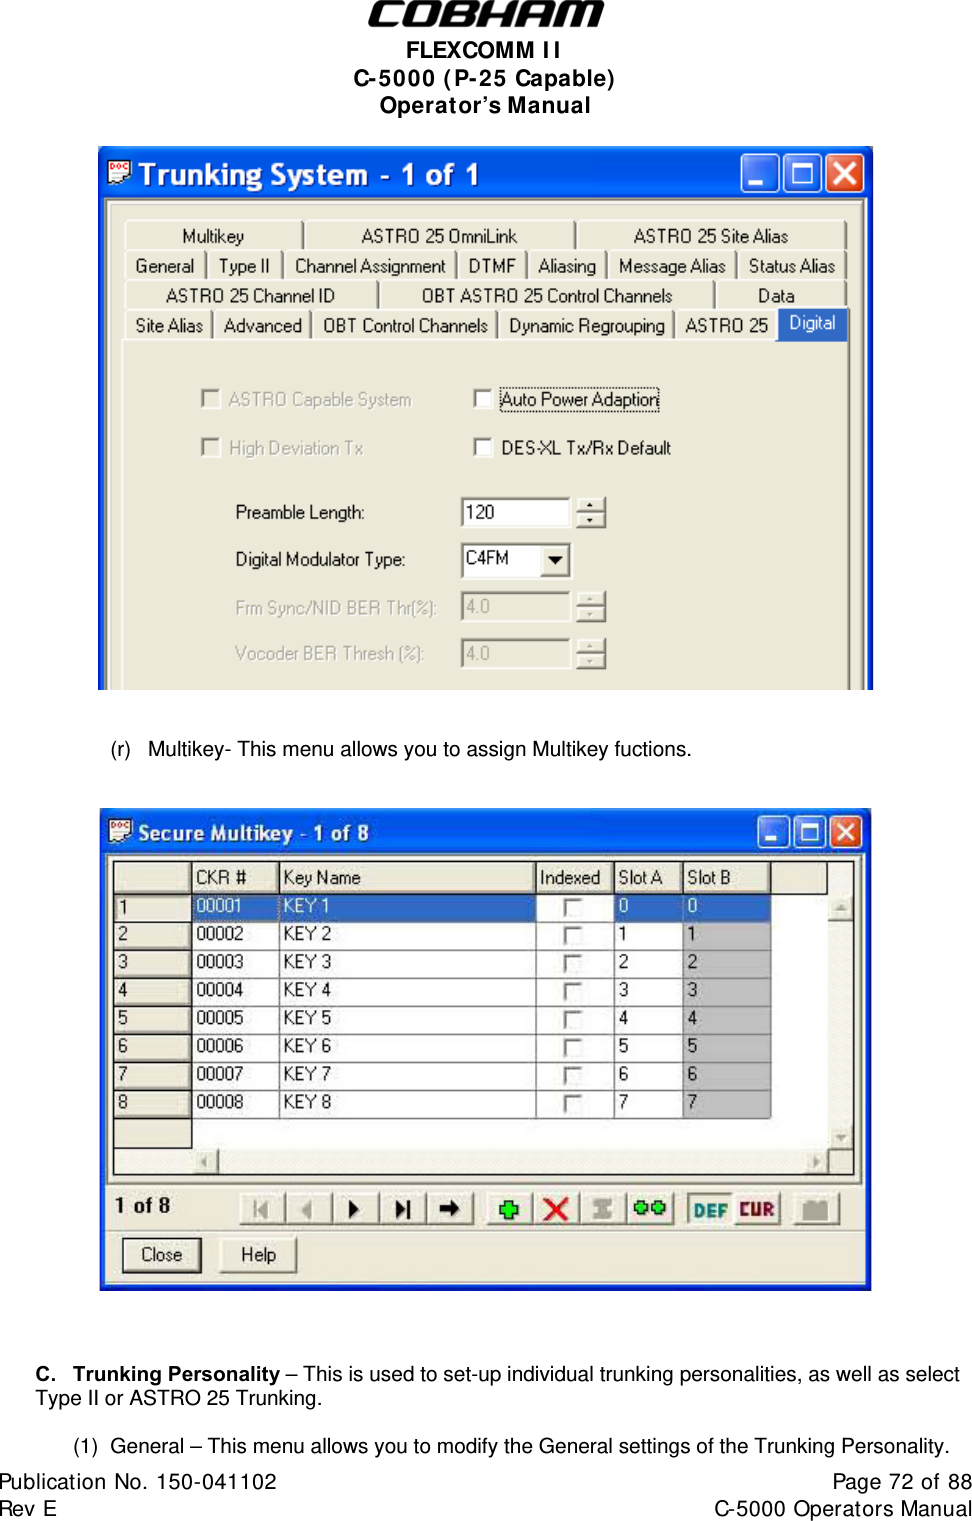  FLEXCOMM I I  C-5000 ( P-25 Capable)  Operator’s Manual    (r)  Multikey- This menu allows you to assign Multikey fuctions.         C. Trunking Personality – This is used to set-up individual trunking personalities, as well as select Type II or ASTRO 25 Trunking.  (1)  General – This menu allows you to modify the General settings of the Trunking Personality. Publication No. 150-041102  Page 72 of 88  Rev E  C-5000 Operators Manual    